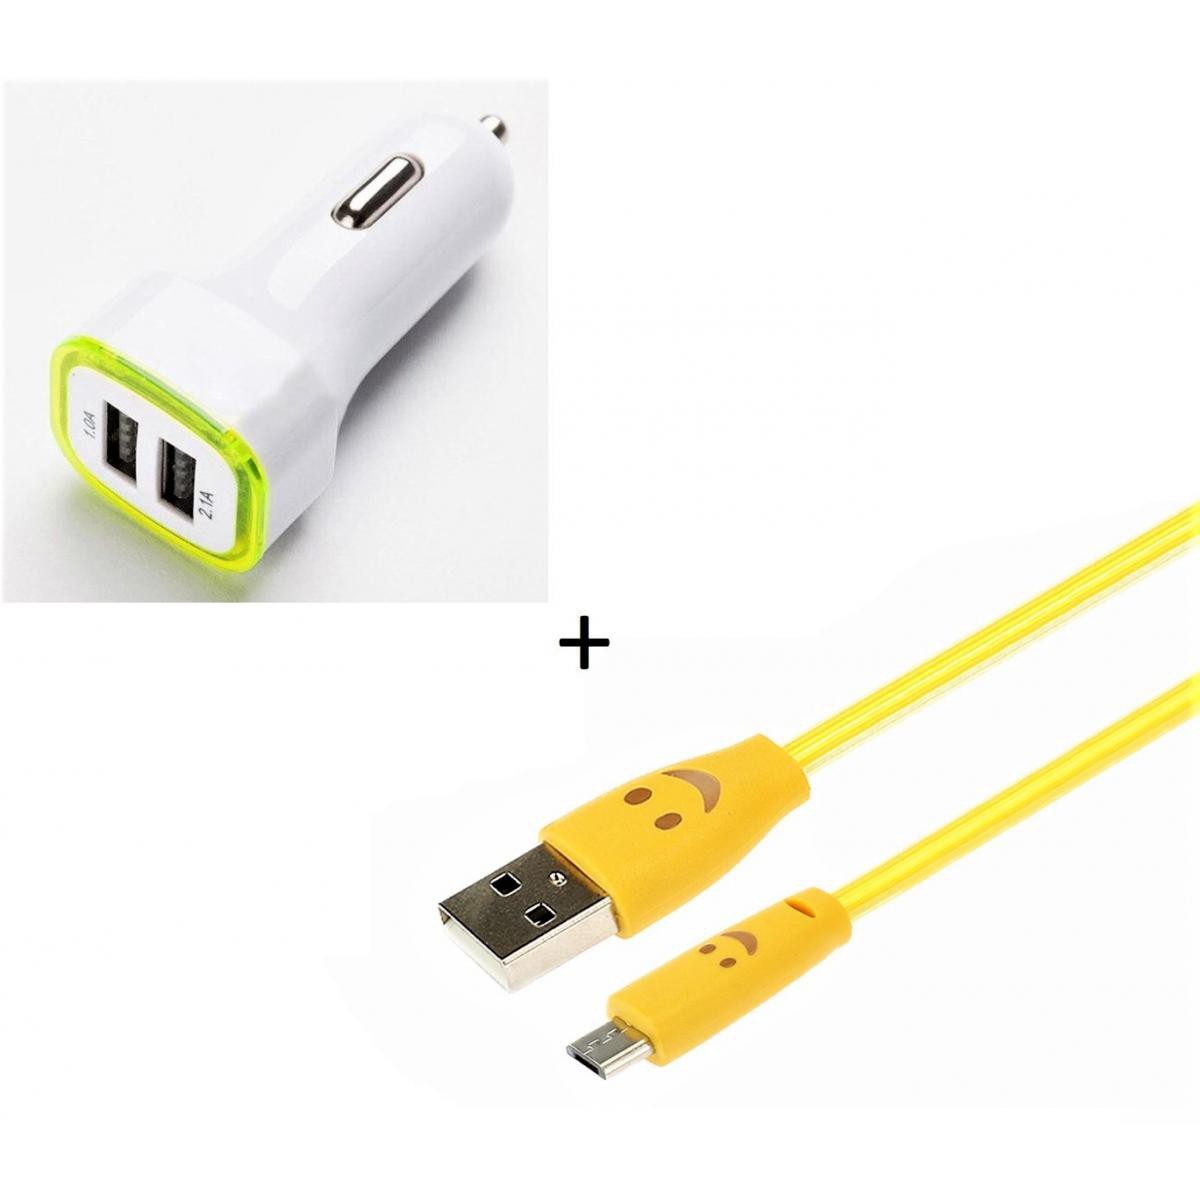 Shot - Pack Chargeur Voiture pour "IPHONE 12 Pro" Lightning (Cable Smiley + Double Adaptateur LED Allume Cigare) (JAUNE) - Chargeur Voiture 12V